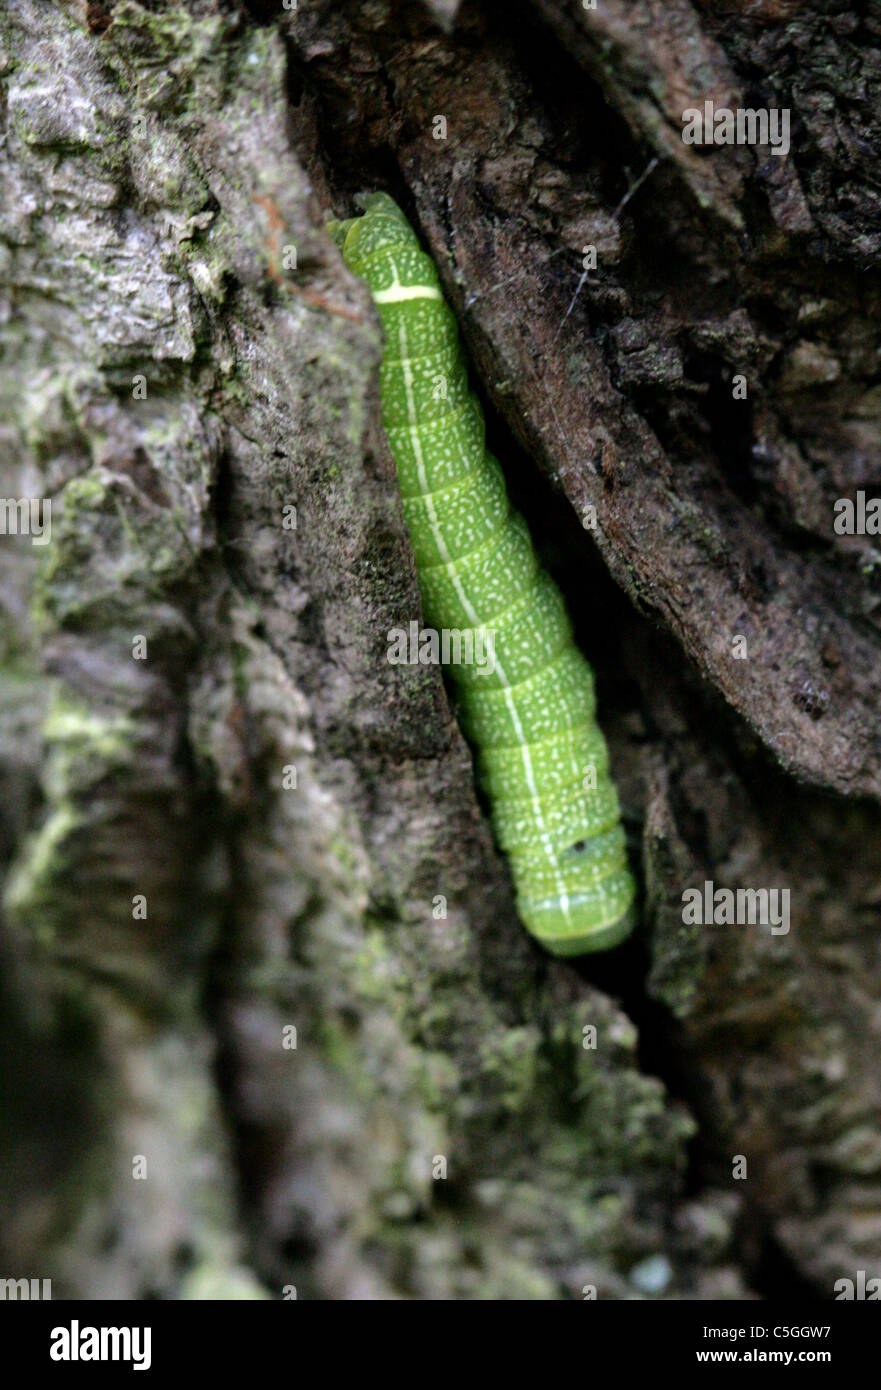 Clouded Drab Moth Caterpillar, Orthosia incerta, Noctuidae, Lepidoptera. Getting Ready to Pupate in a Tree Crack. Stock Photo